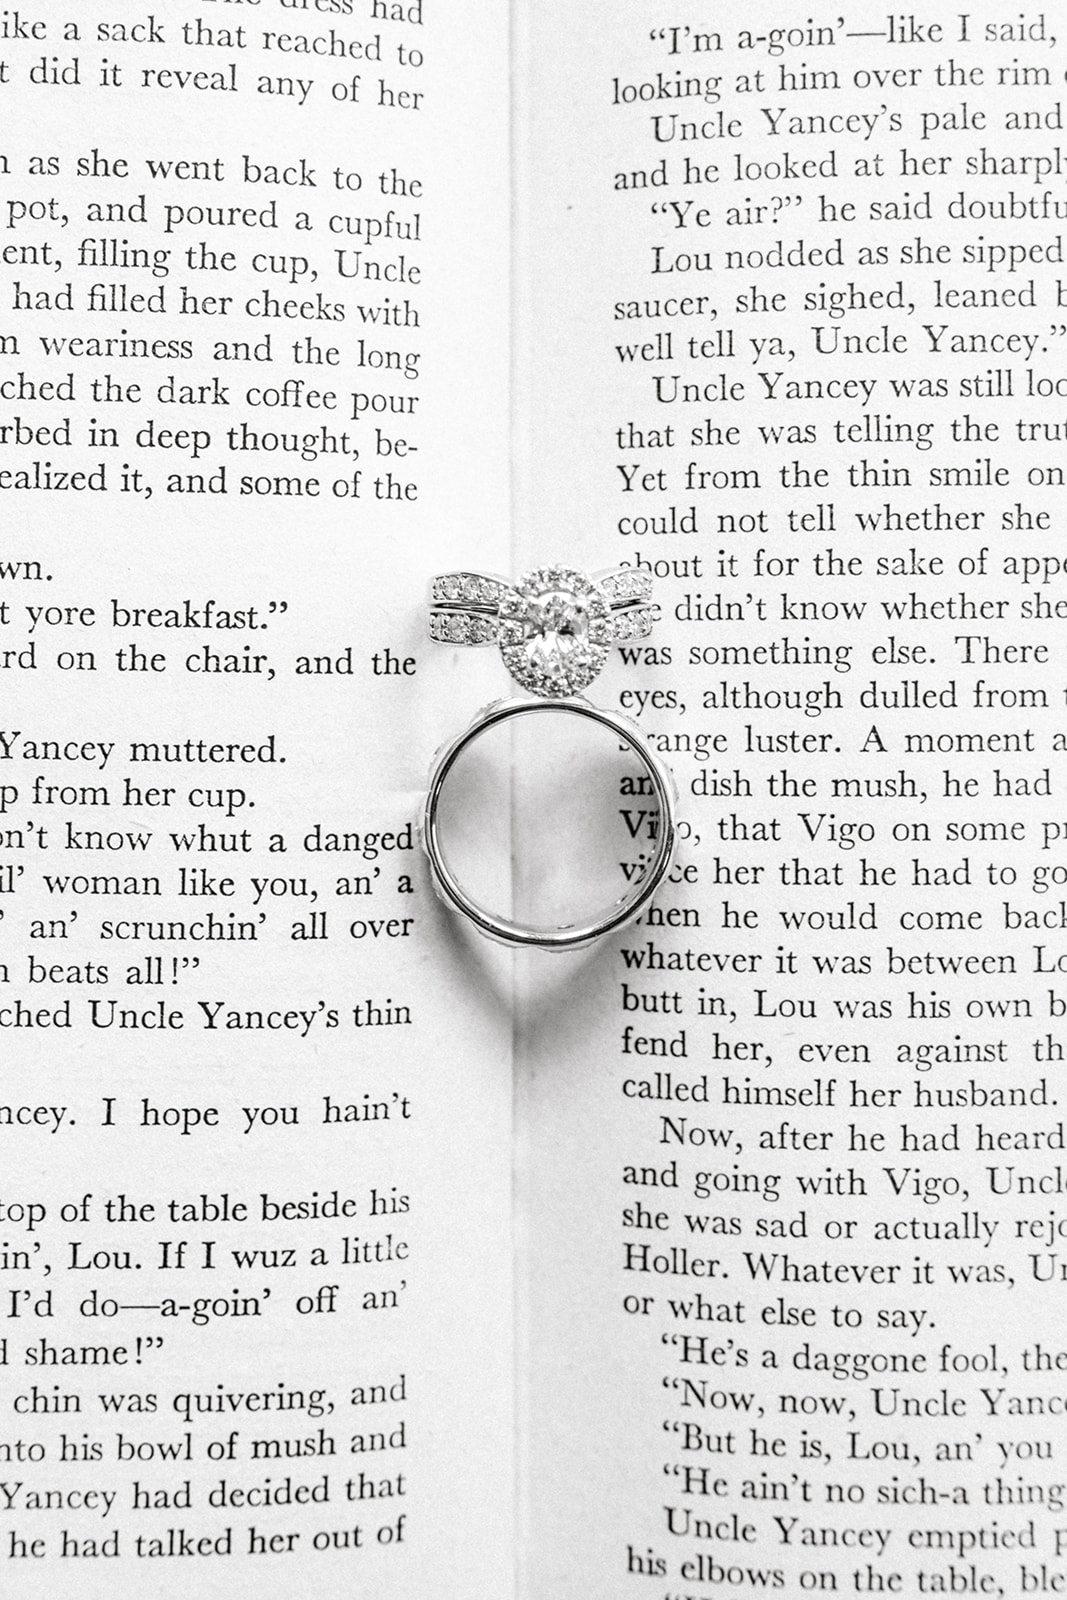 wedding rings details black and white